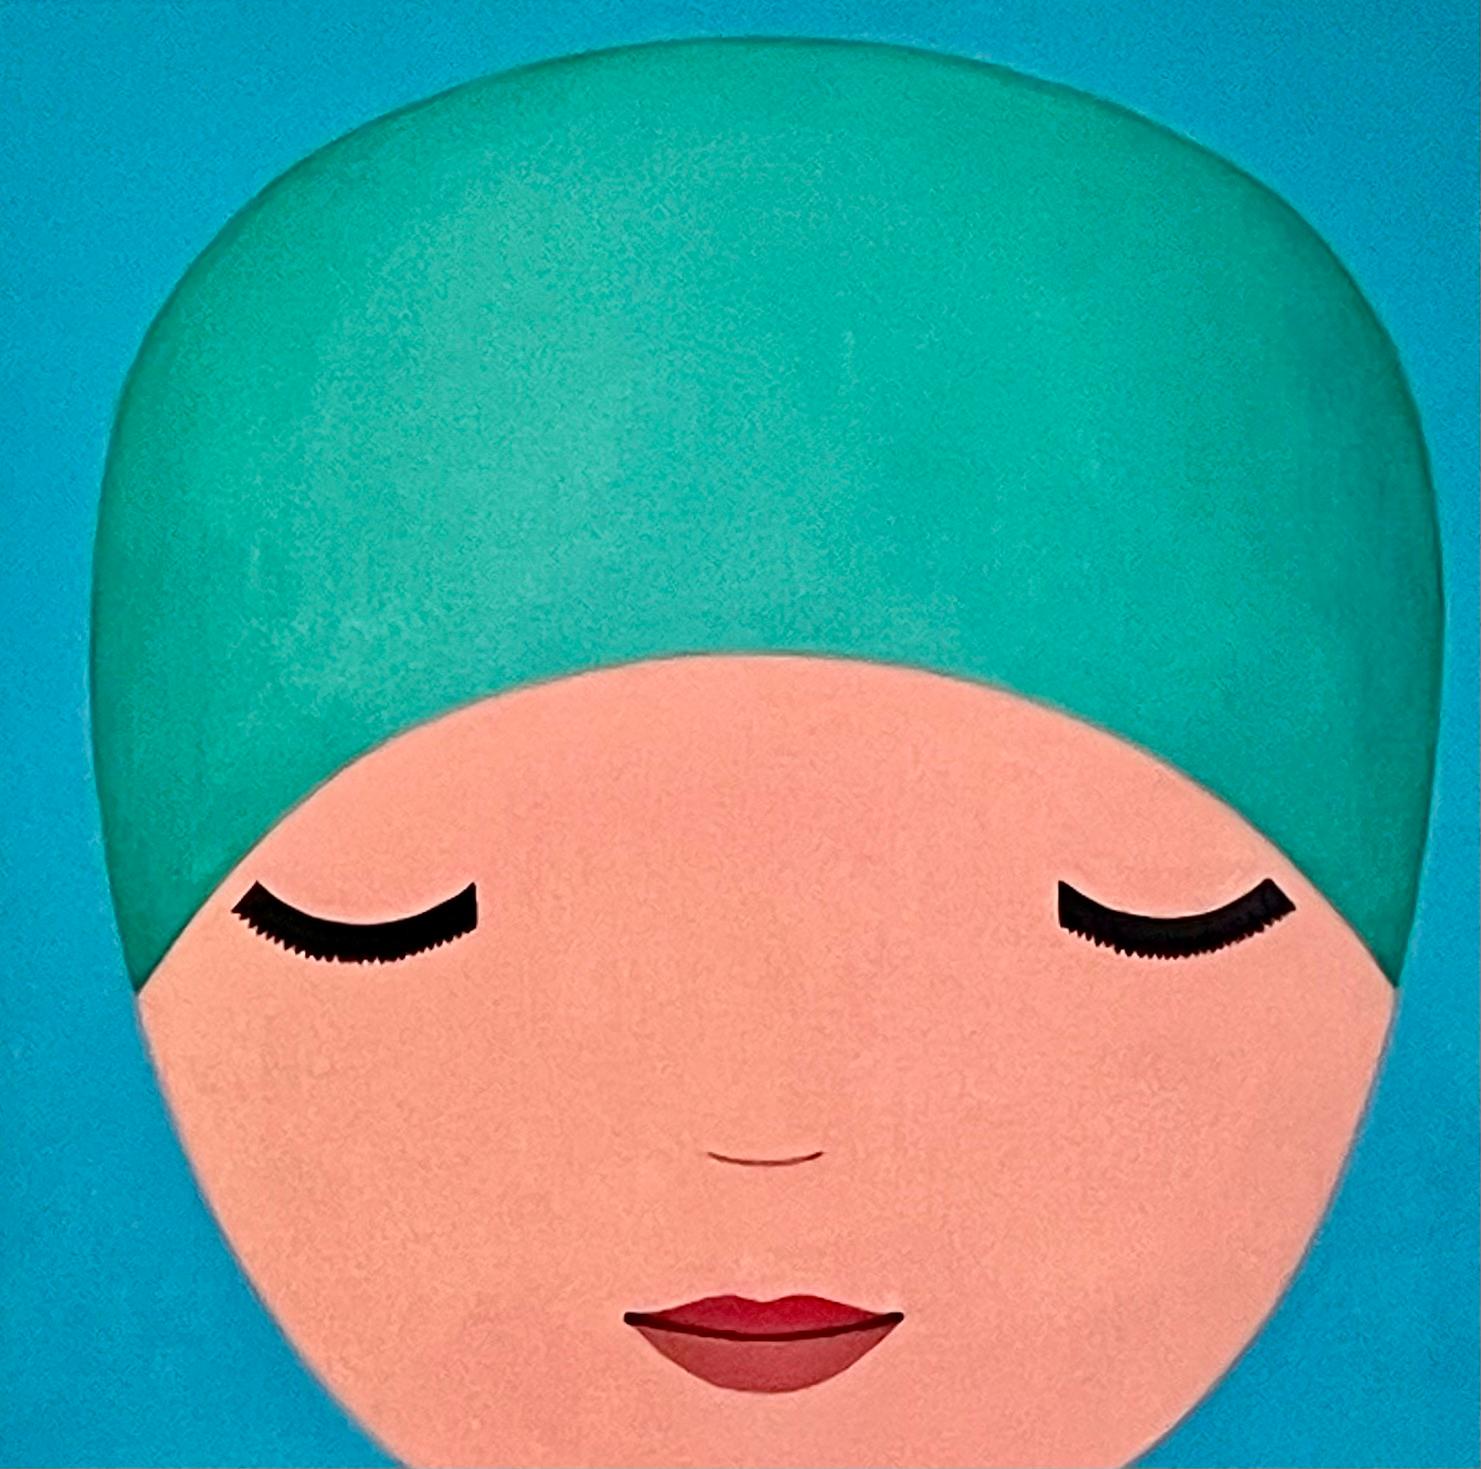 Turquoise Swimmer - Painting by Ayse Wilson